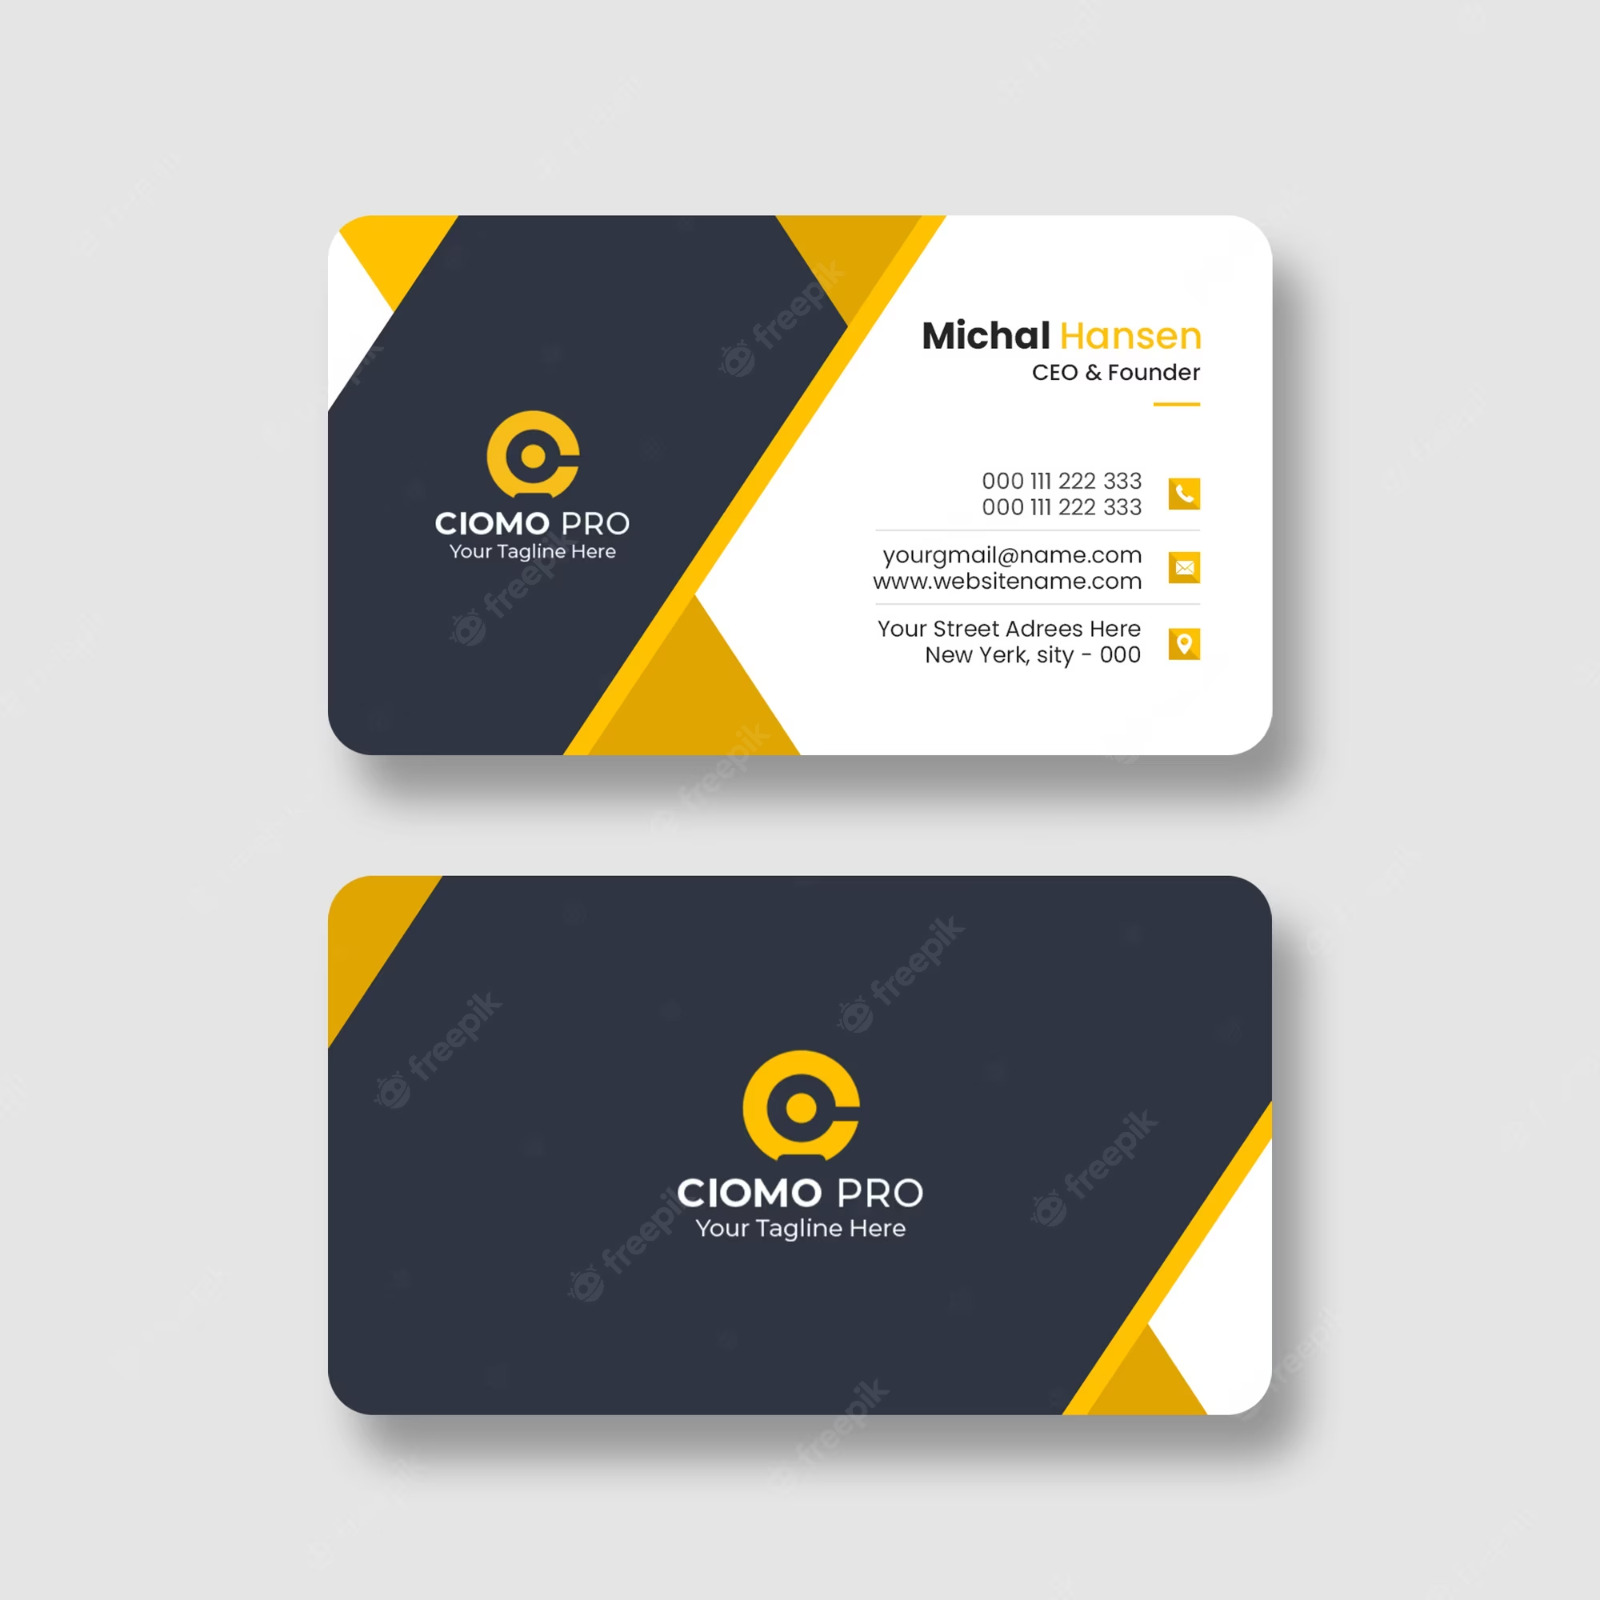 Professional Business Card Templates - Customizable Design | Fast Delivery